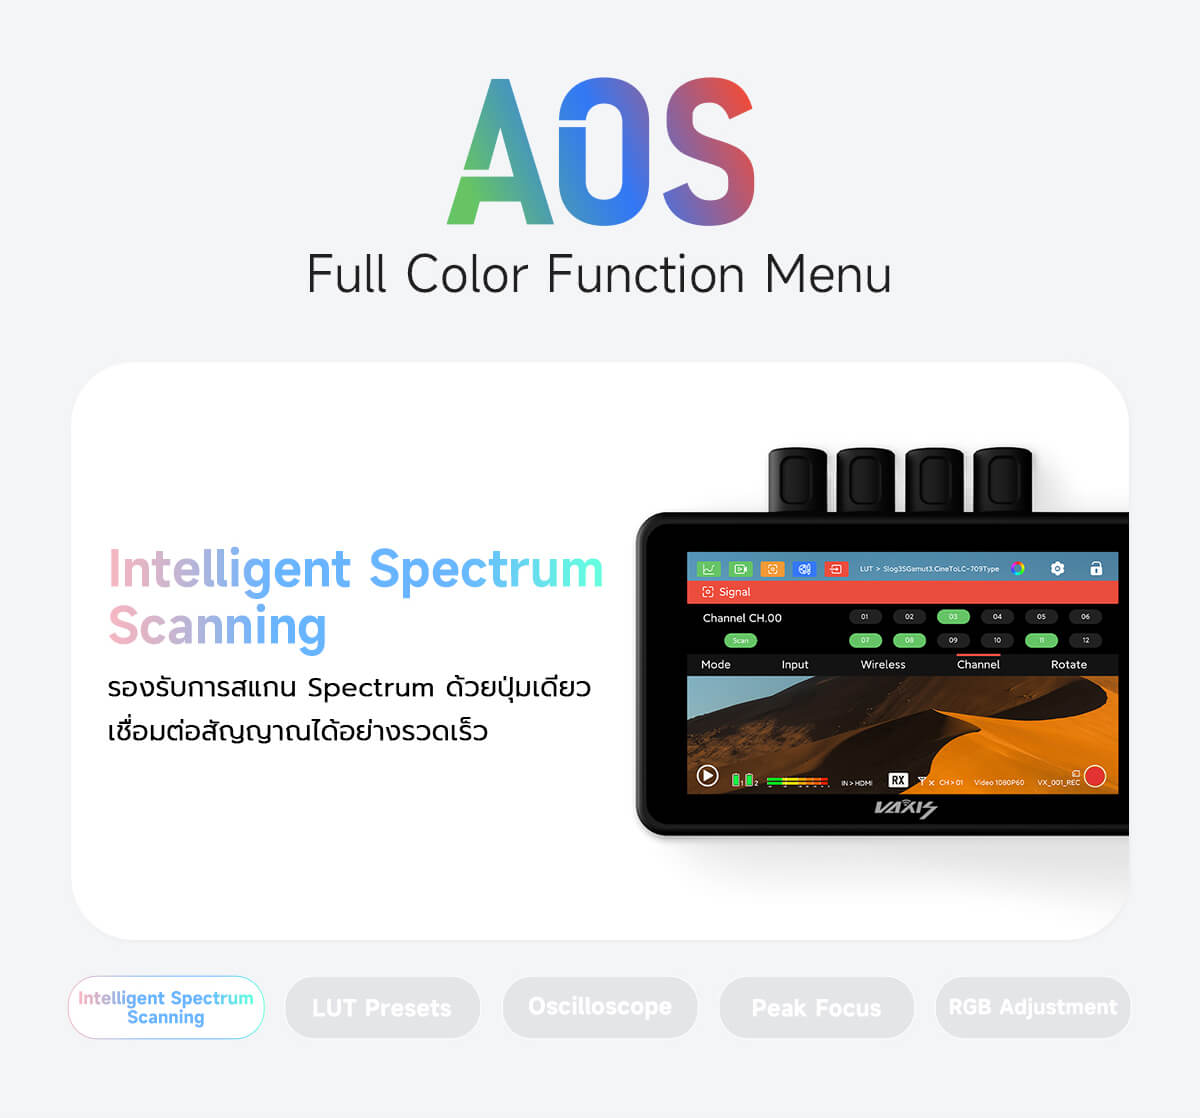 A5 Full color function